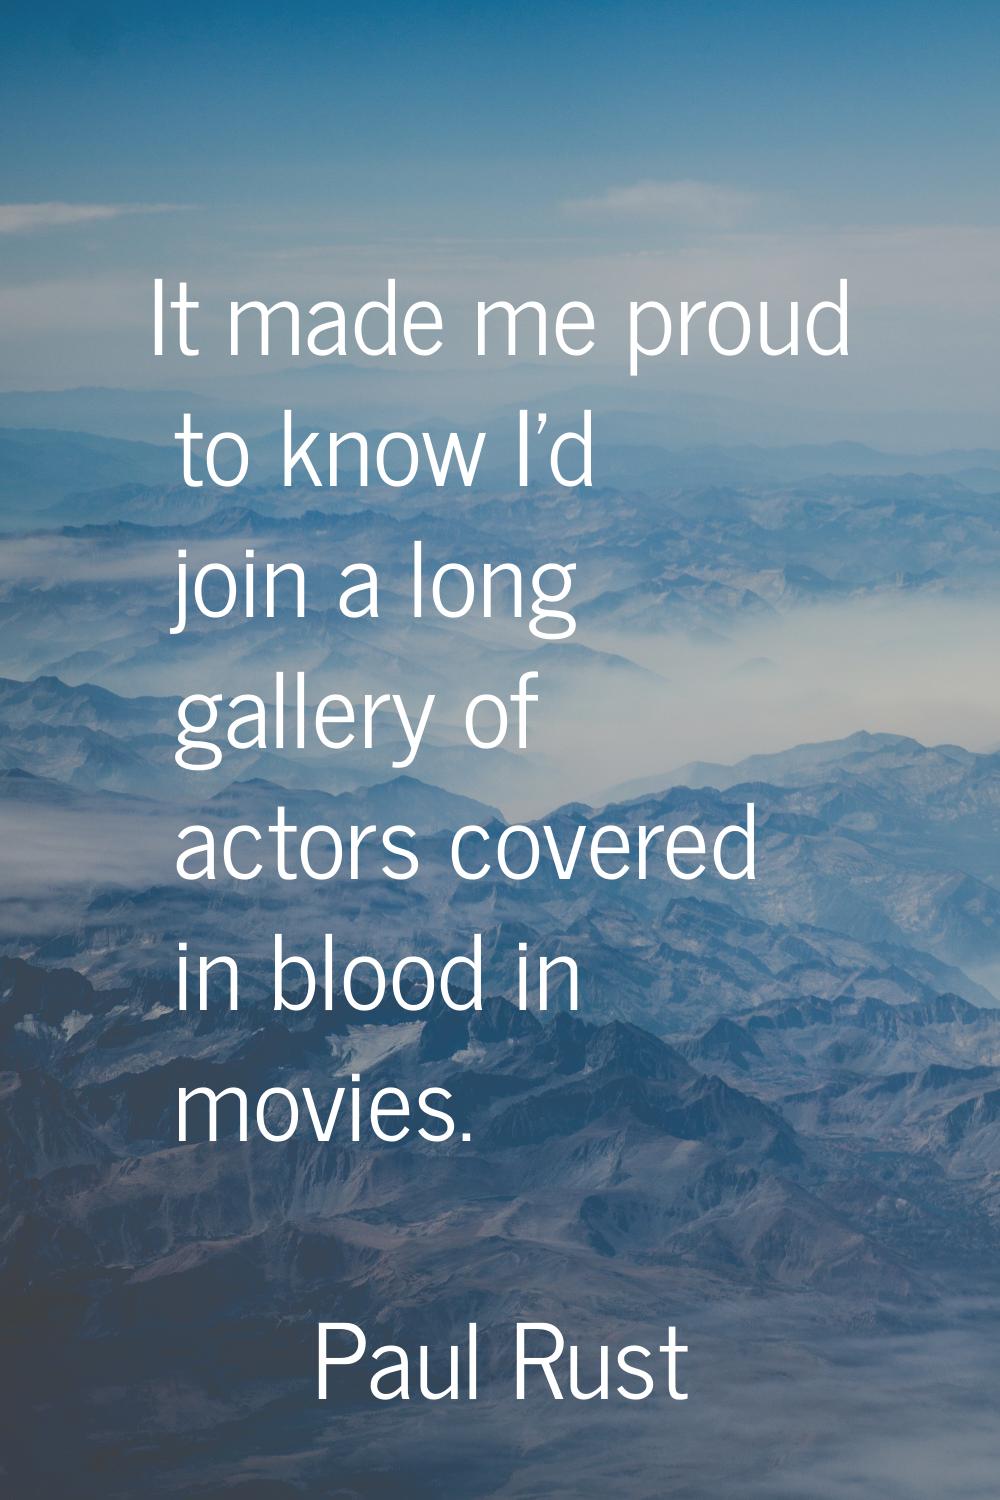 It made me proud to know I'd join a long gallery of actors covered in blood in movies.